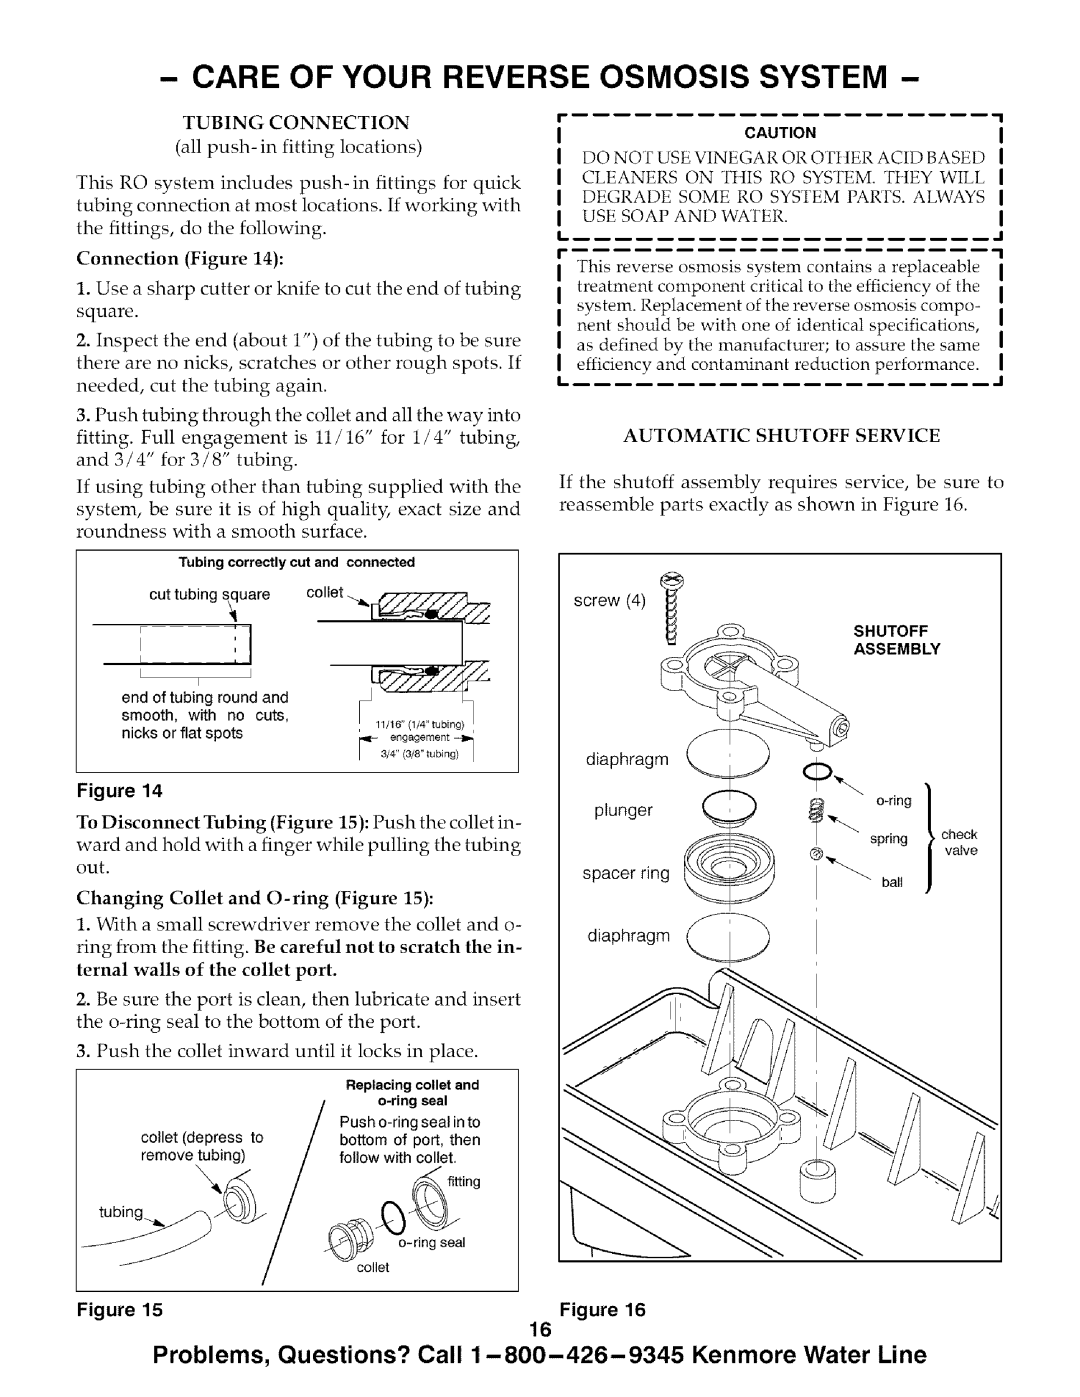 Kenmore 625.385700, 625.385720 owner manual Care Of Your Reverse Osmosis System, Changing Collet and O-ringFigure 